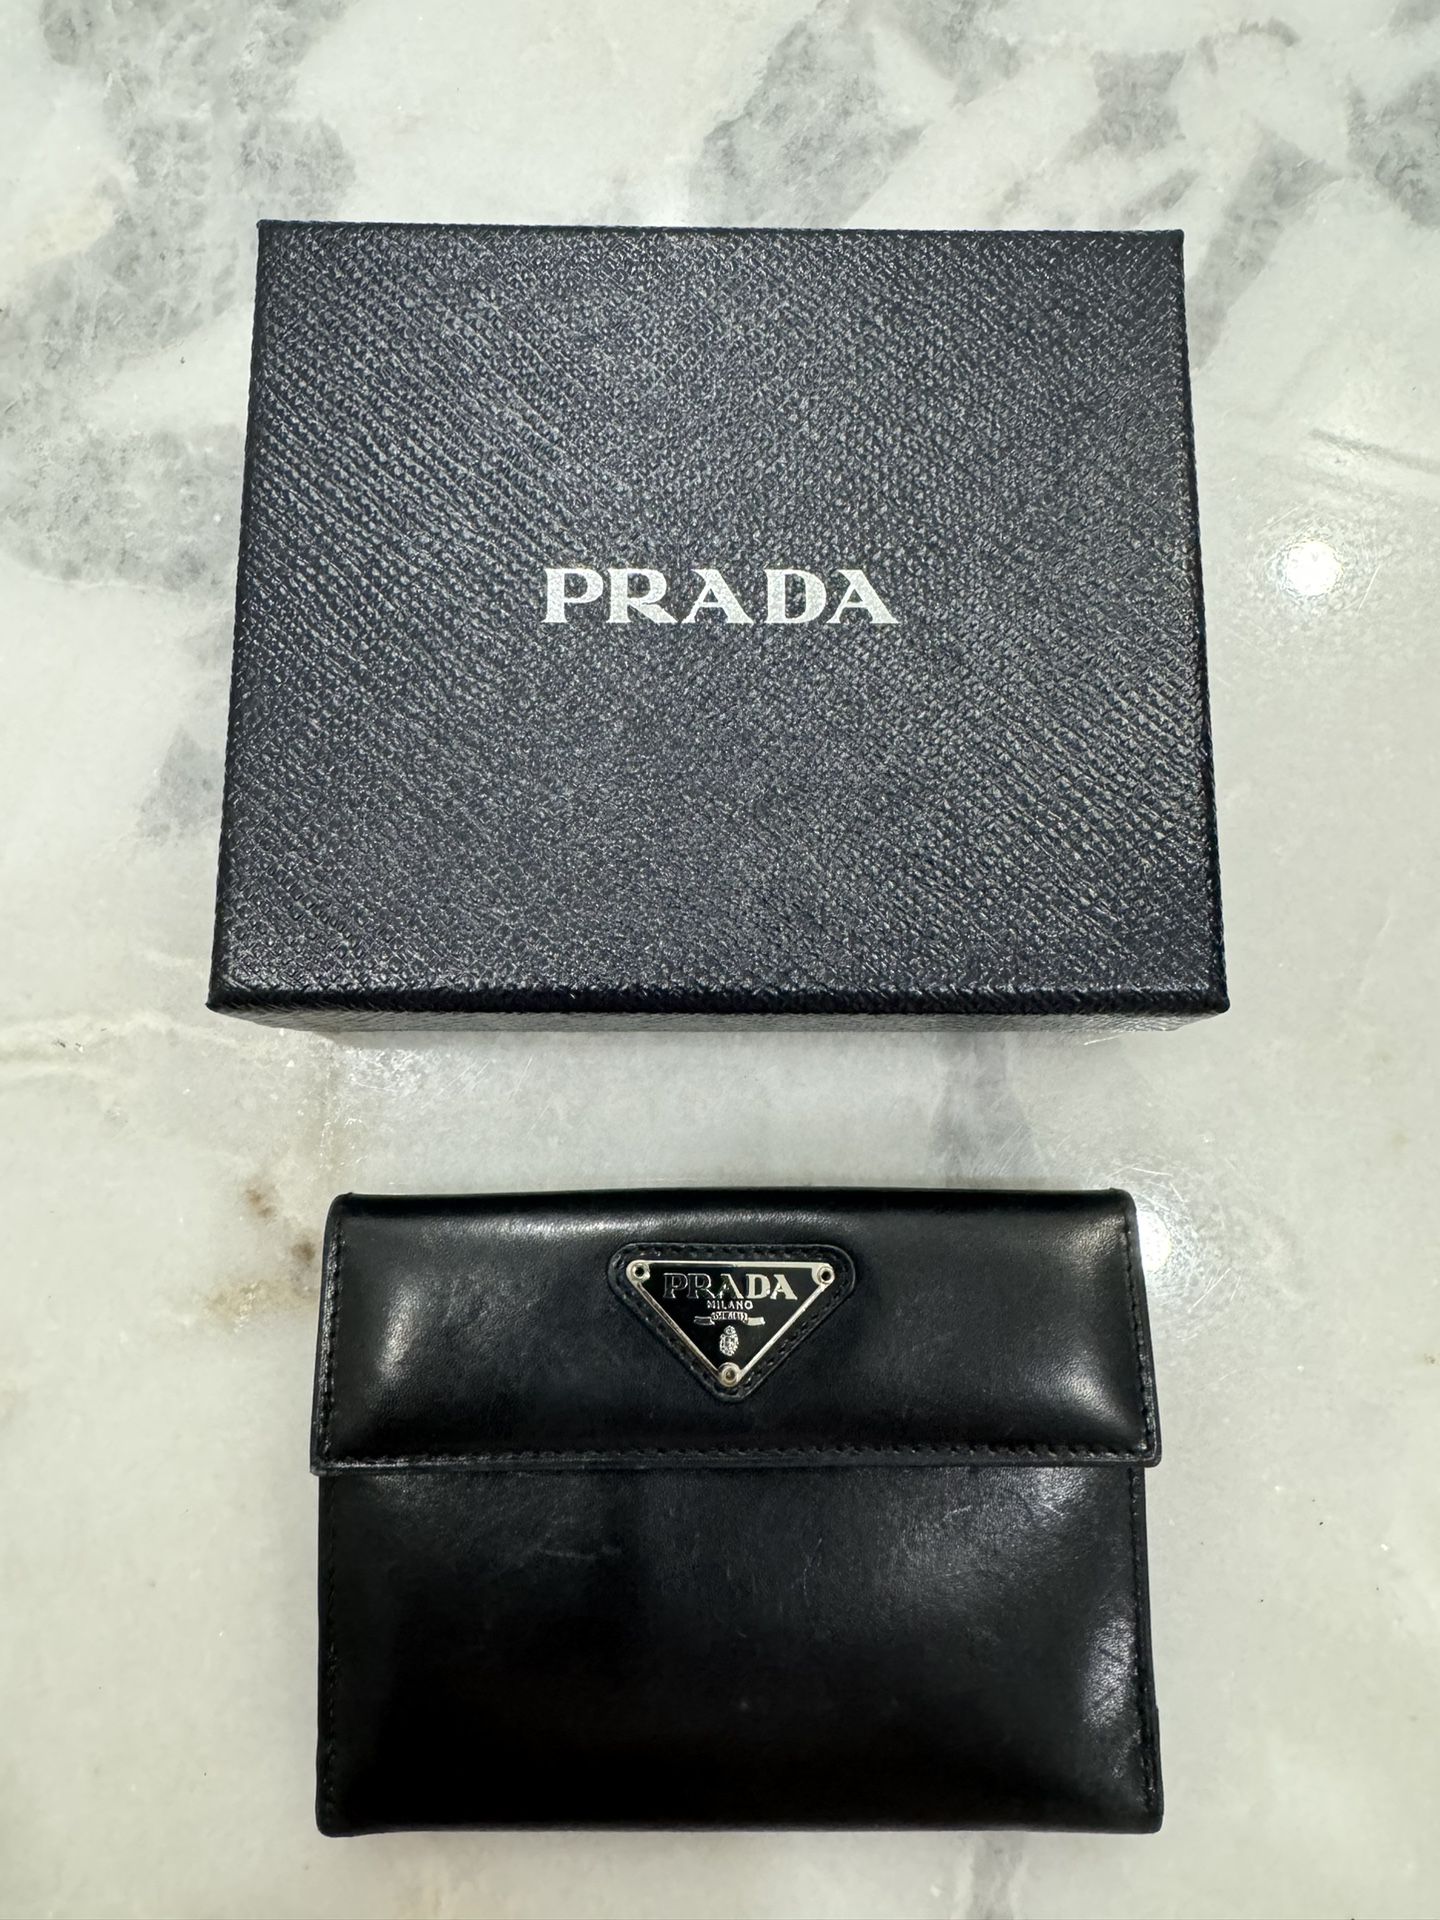 Prada Milano Elegant Trifold Patent Leather Wallet Made in Italy -  Great Condition - $175